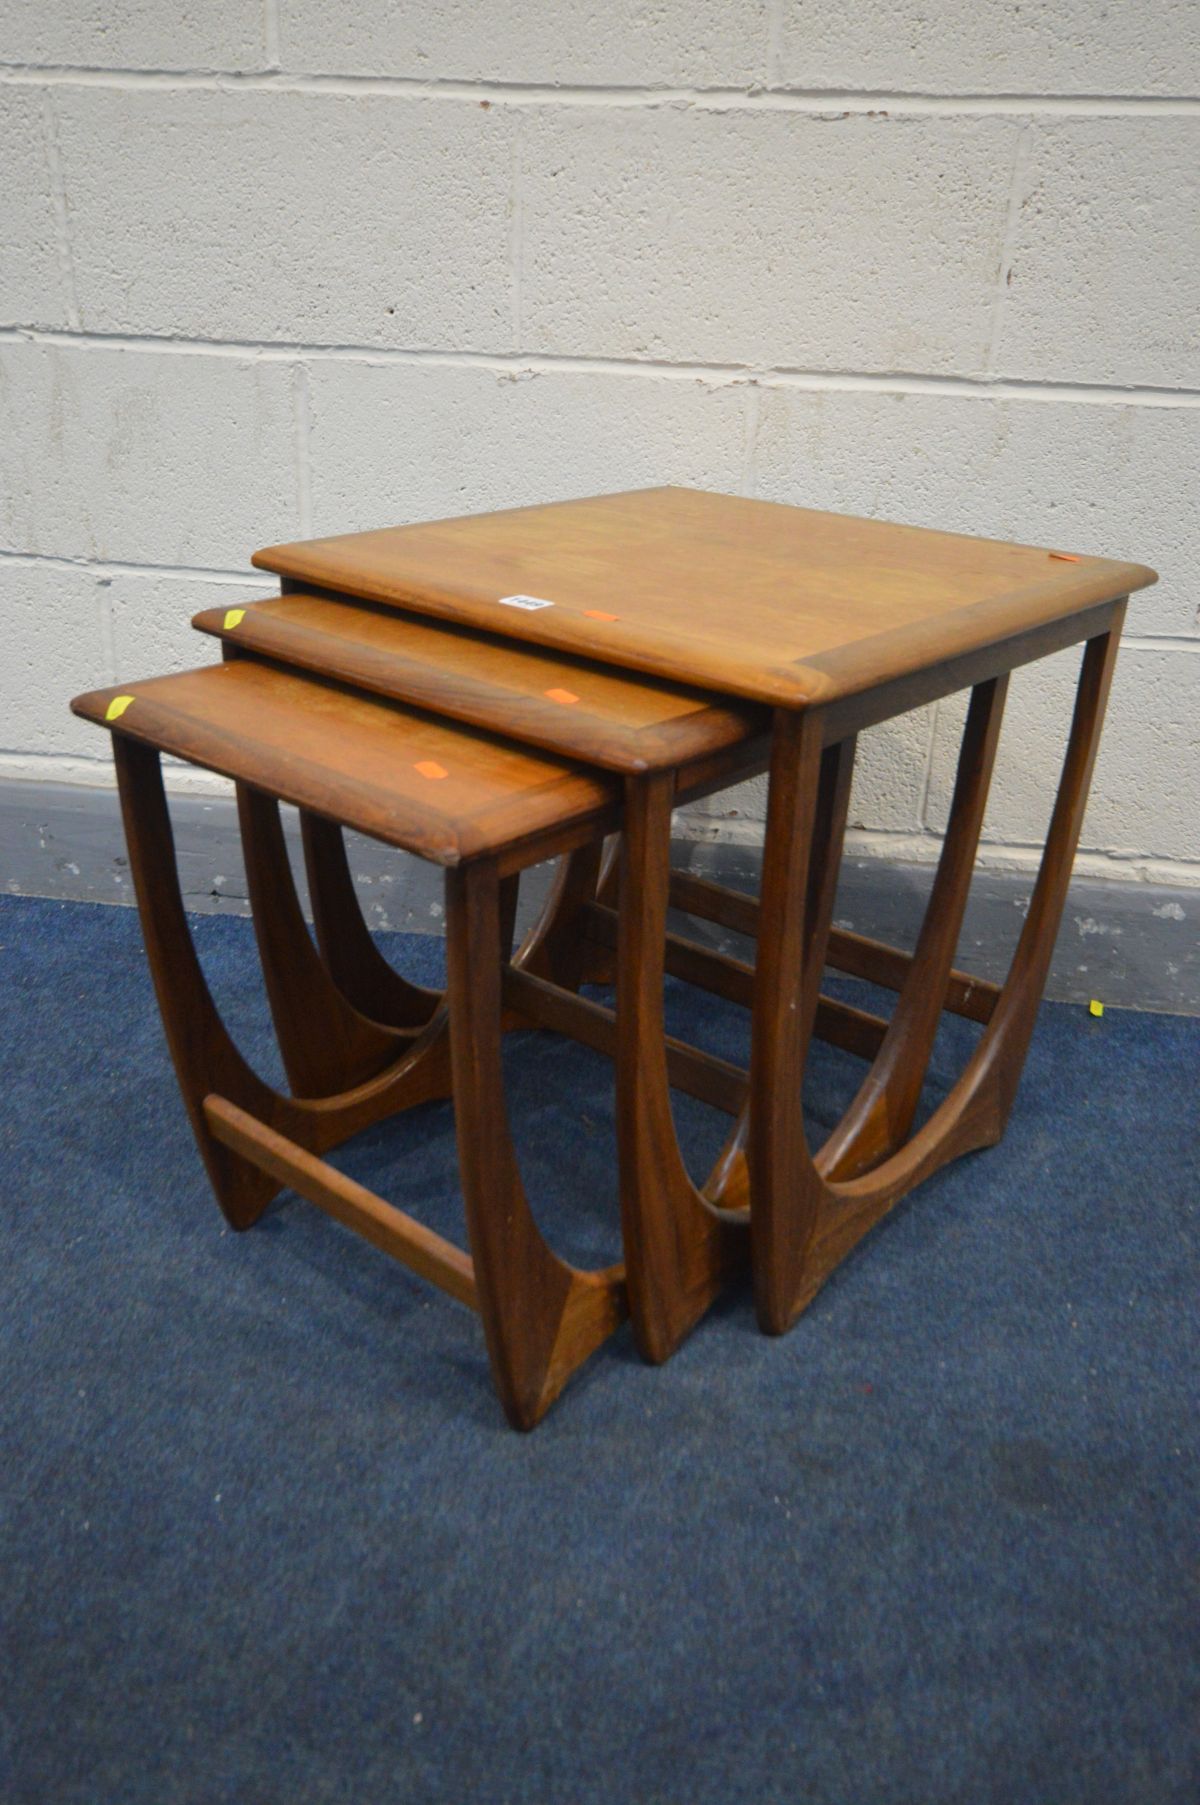 A G PLAN FRESCO TEAK NEST OF THREE TABLES (condition:- fluid stains to each table)